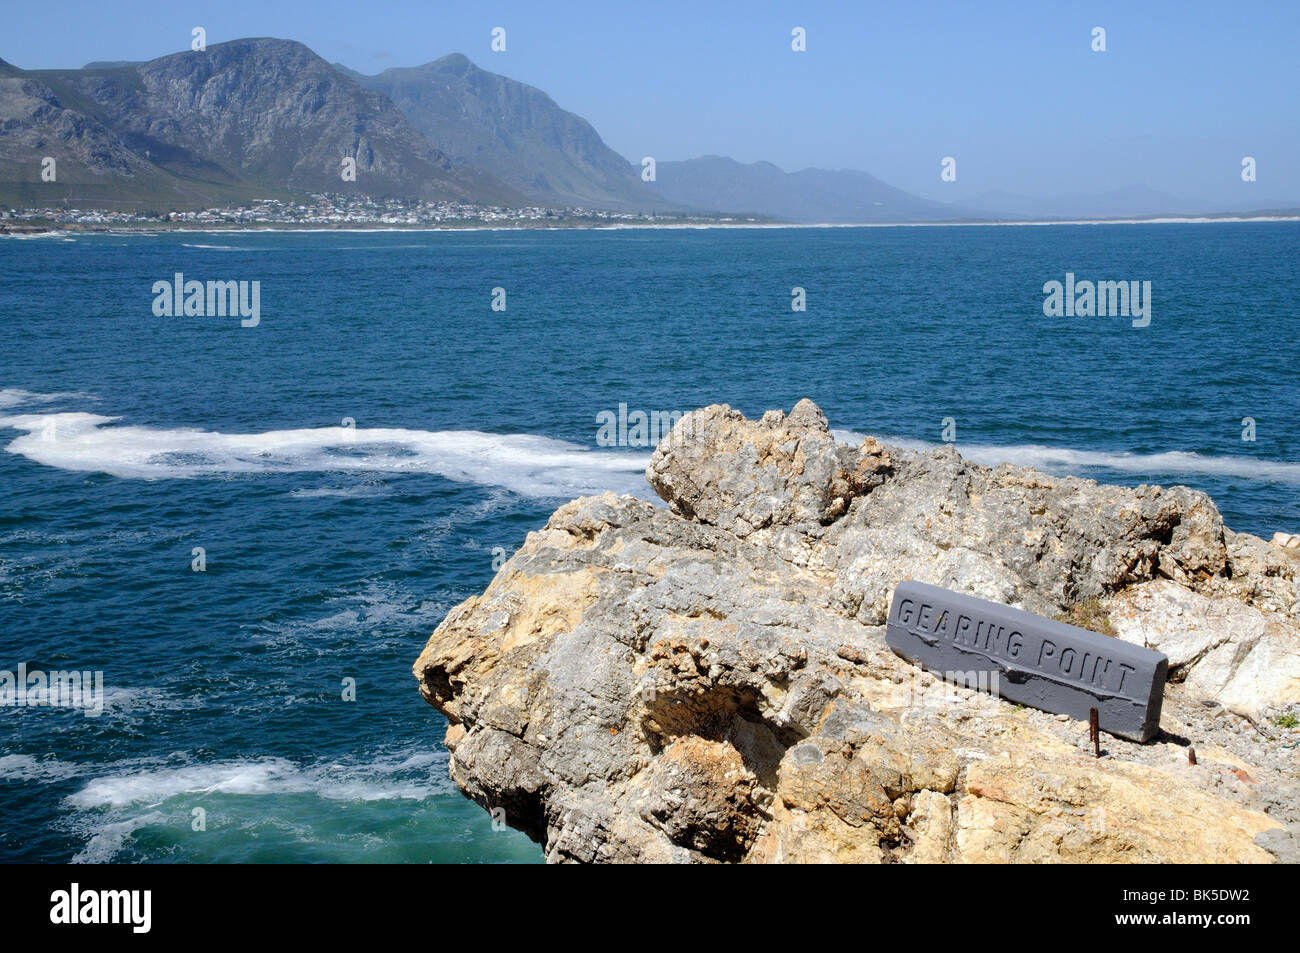 Gearing Point at Hermanus western Cape South Africa outlooks Atlantic Ocean Stock Photo